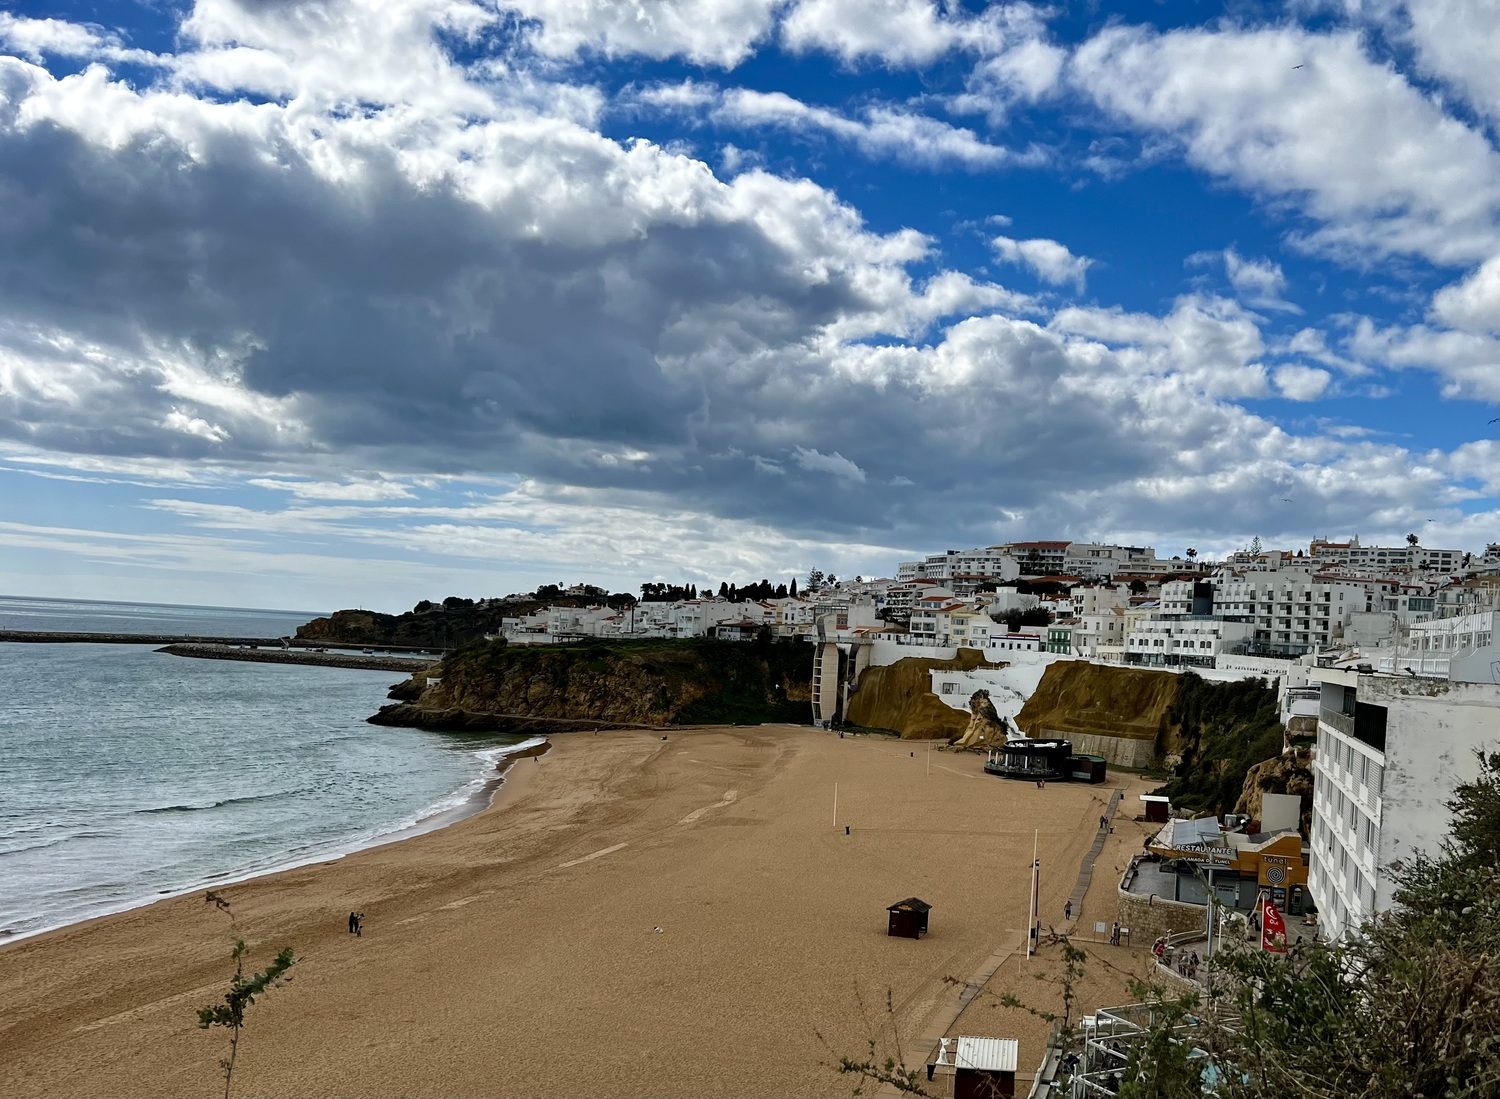 Visiting *Albufeira.* We ended up having lunch in the round black restaurant in the distance on the beach!